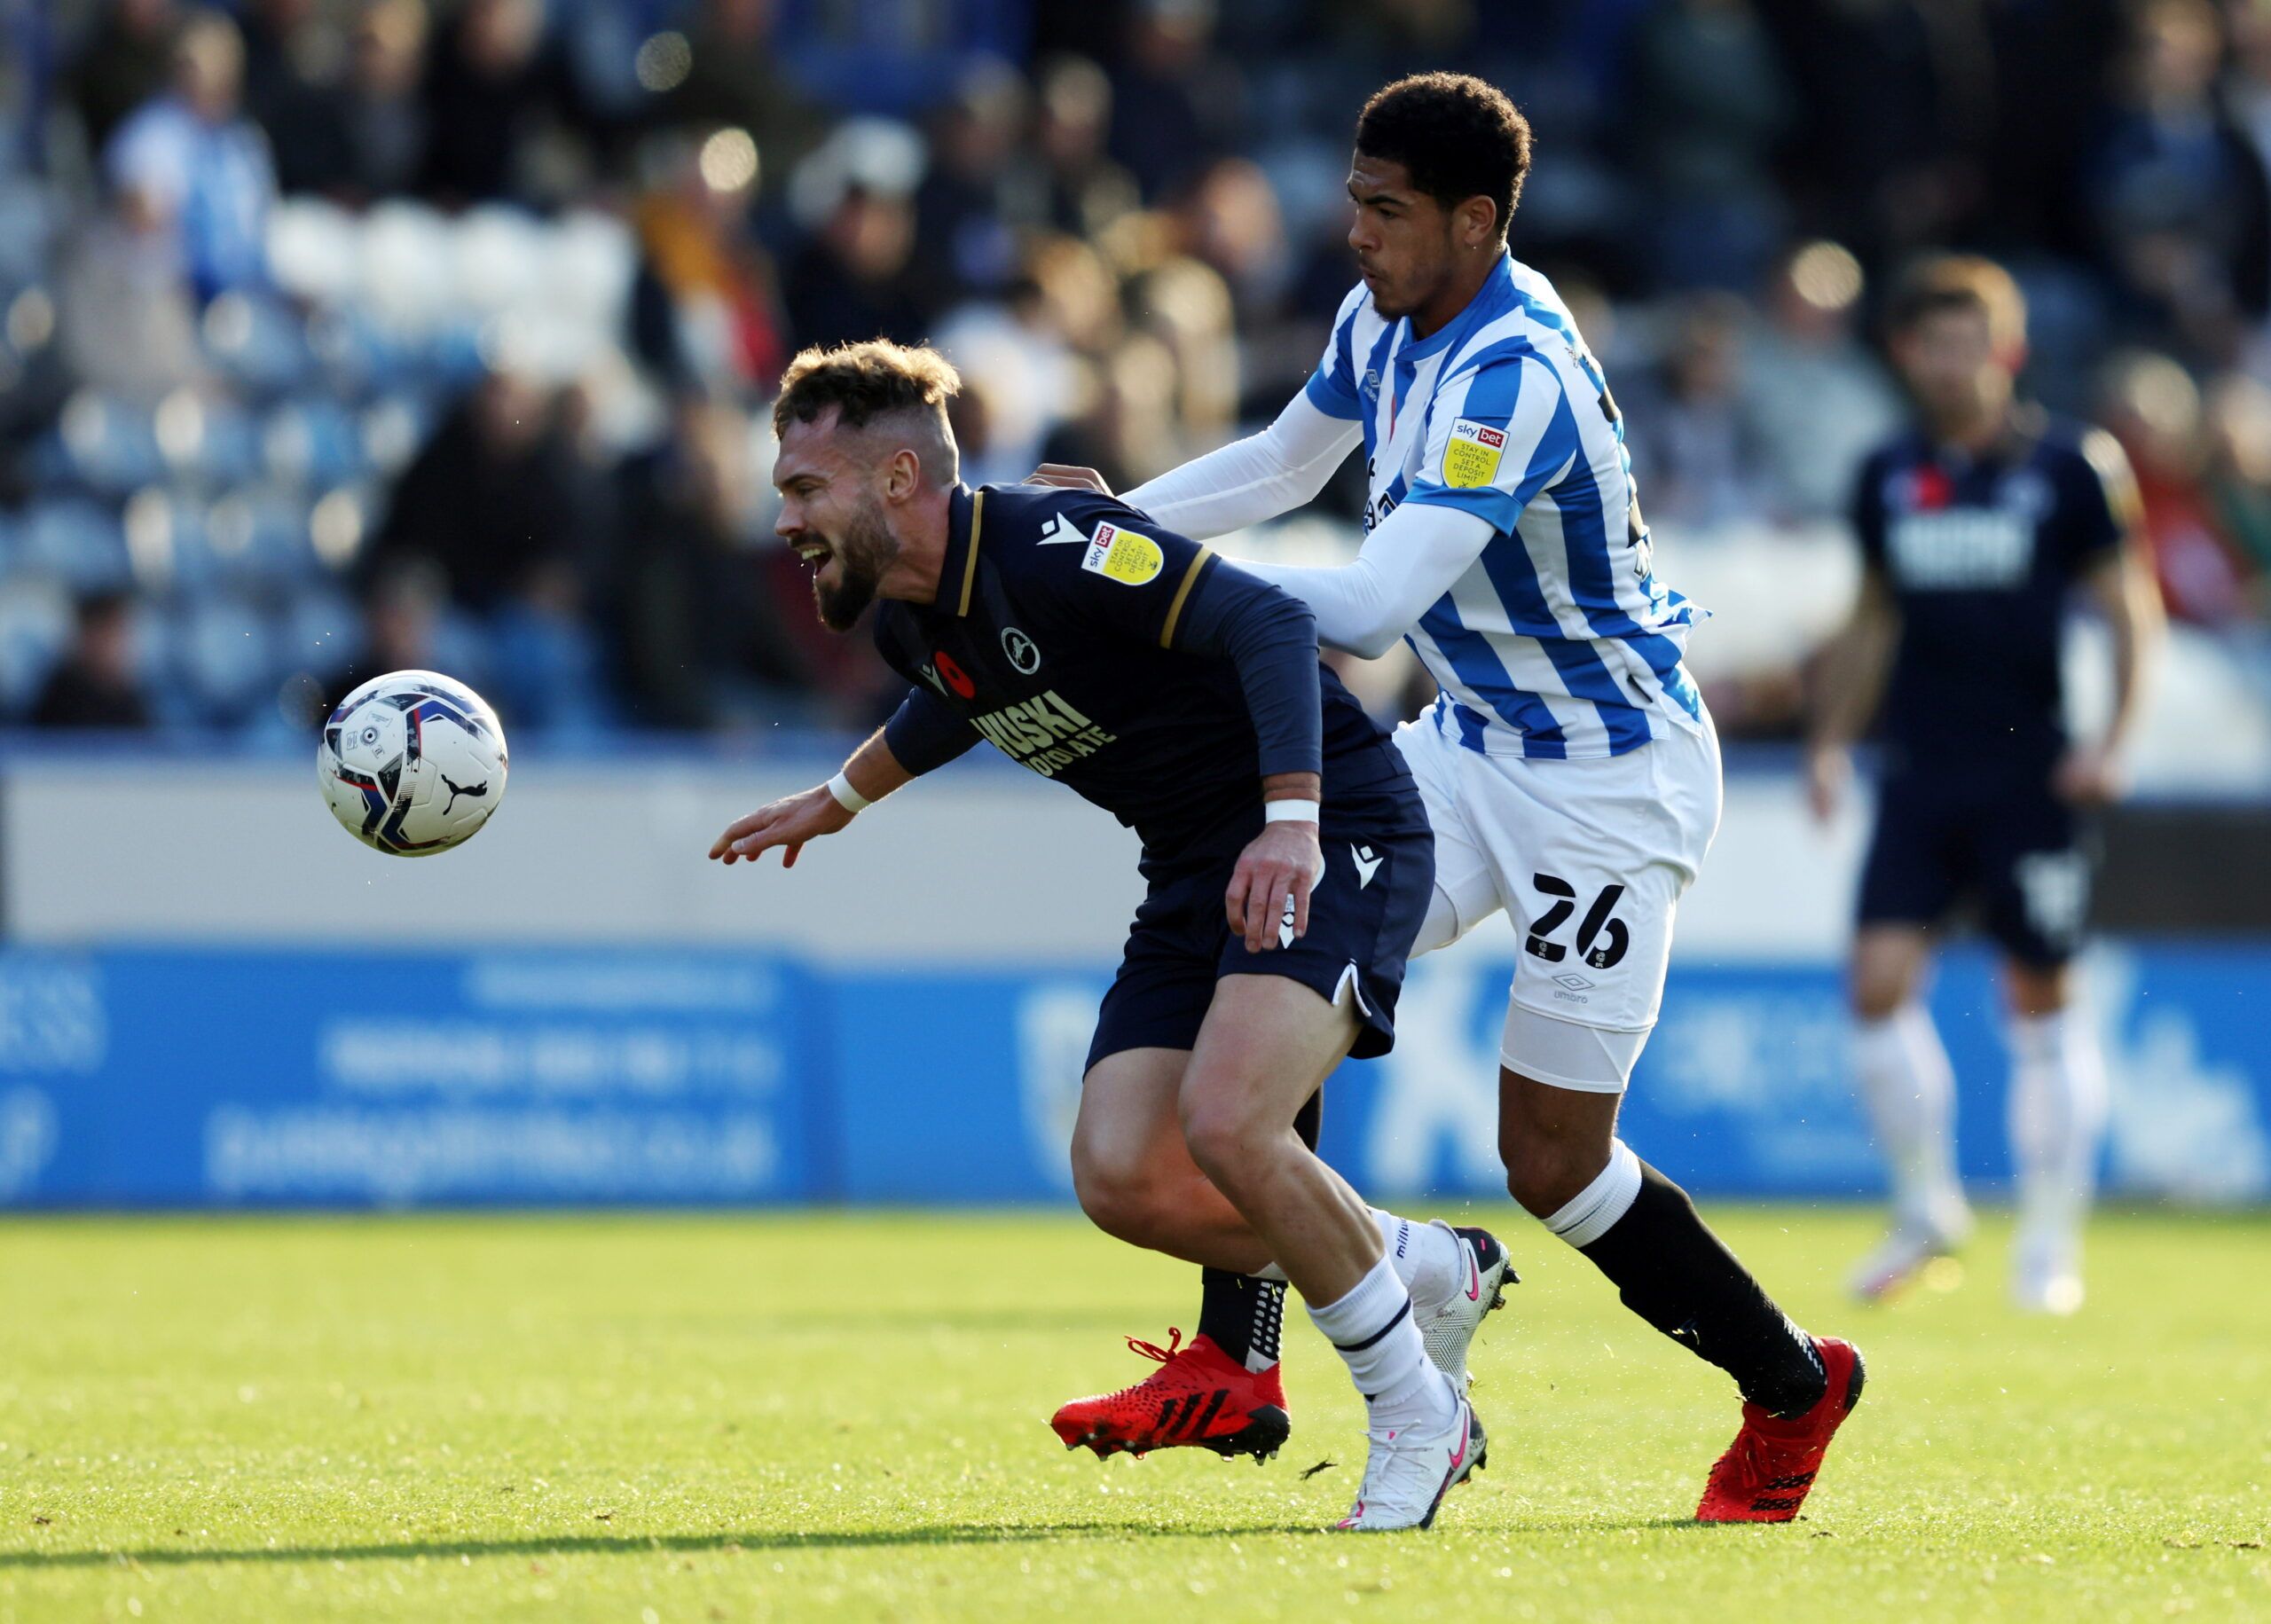 Soccer Football - Championship - Huddersfield Town v Millwall - John Smith's Stadium, Huddersfield, Britain - October 30, 2021 Huddersfield Town's Levi Colwill in action with Millwall's Tom Bradshaw  Action Images/John Clifton  EDITORIAL USE ONLY. No use with unauthorized audio, video, data, fixture lists, club/league logos or 